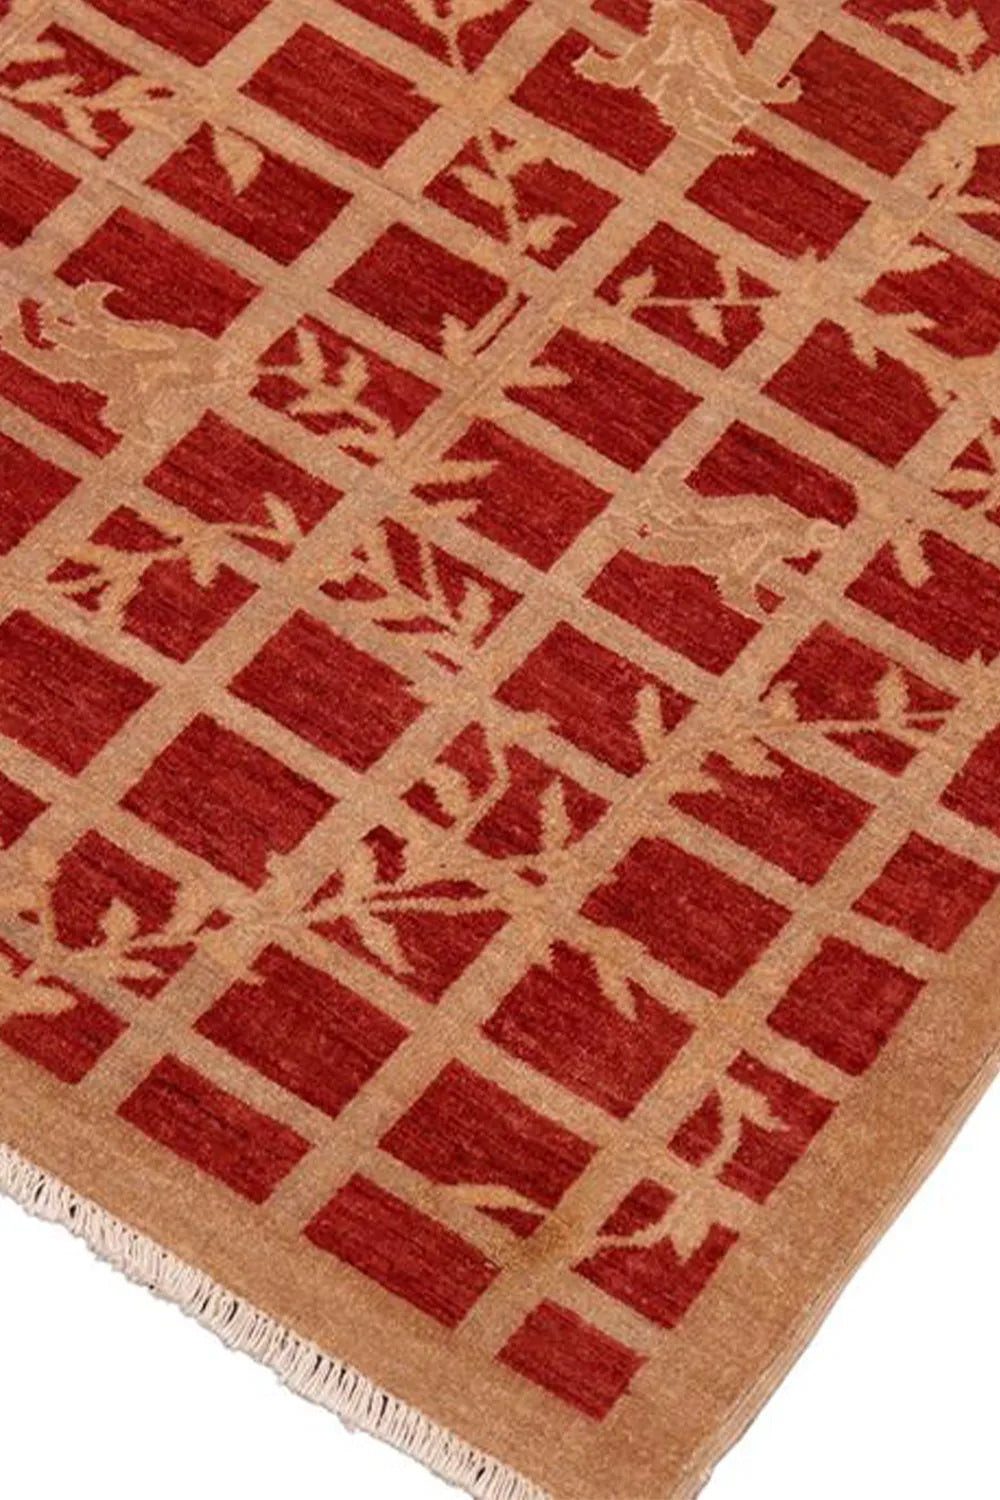 Low pile wool rug in a warm red and brown colorway, blending classic and contemporary.